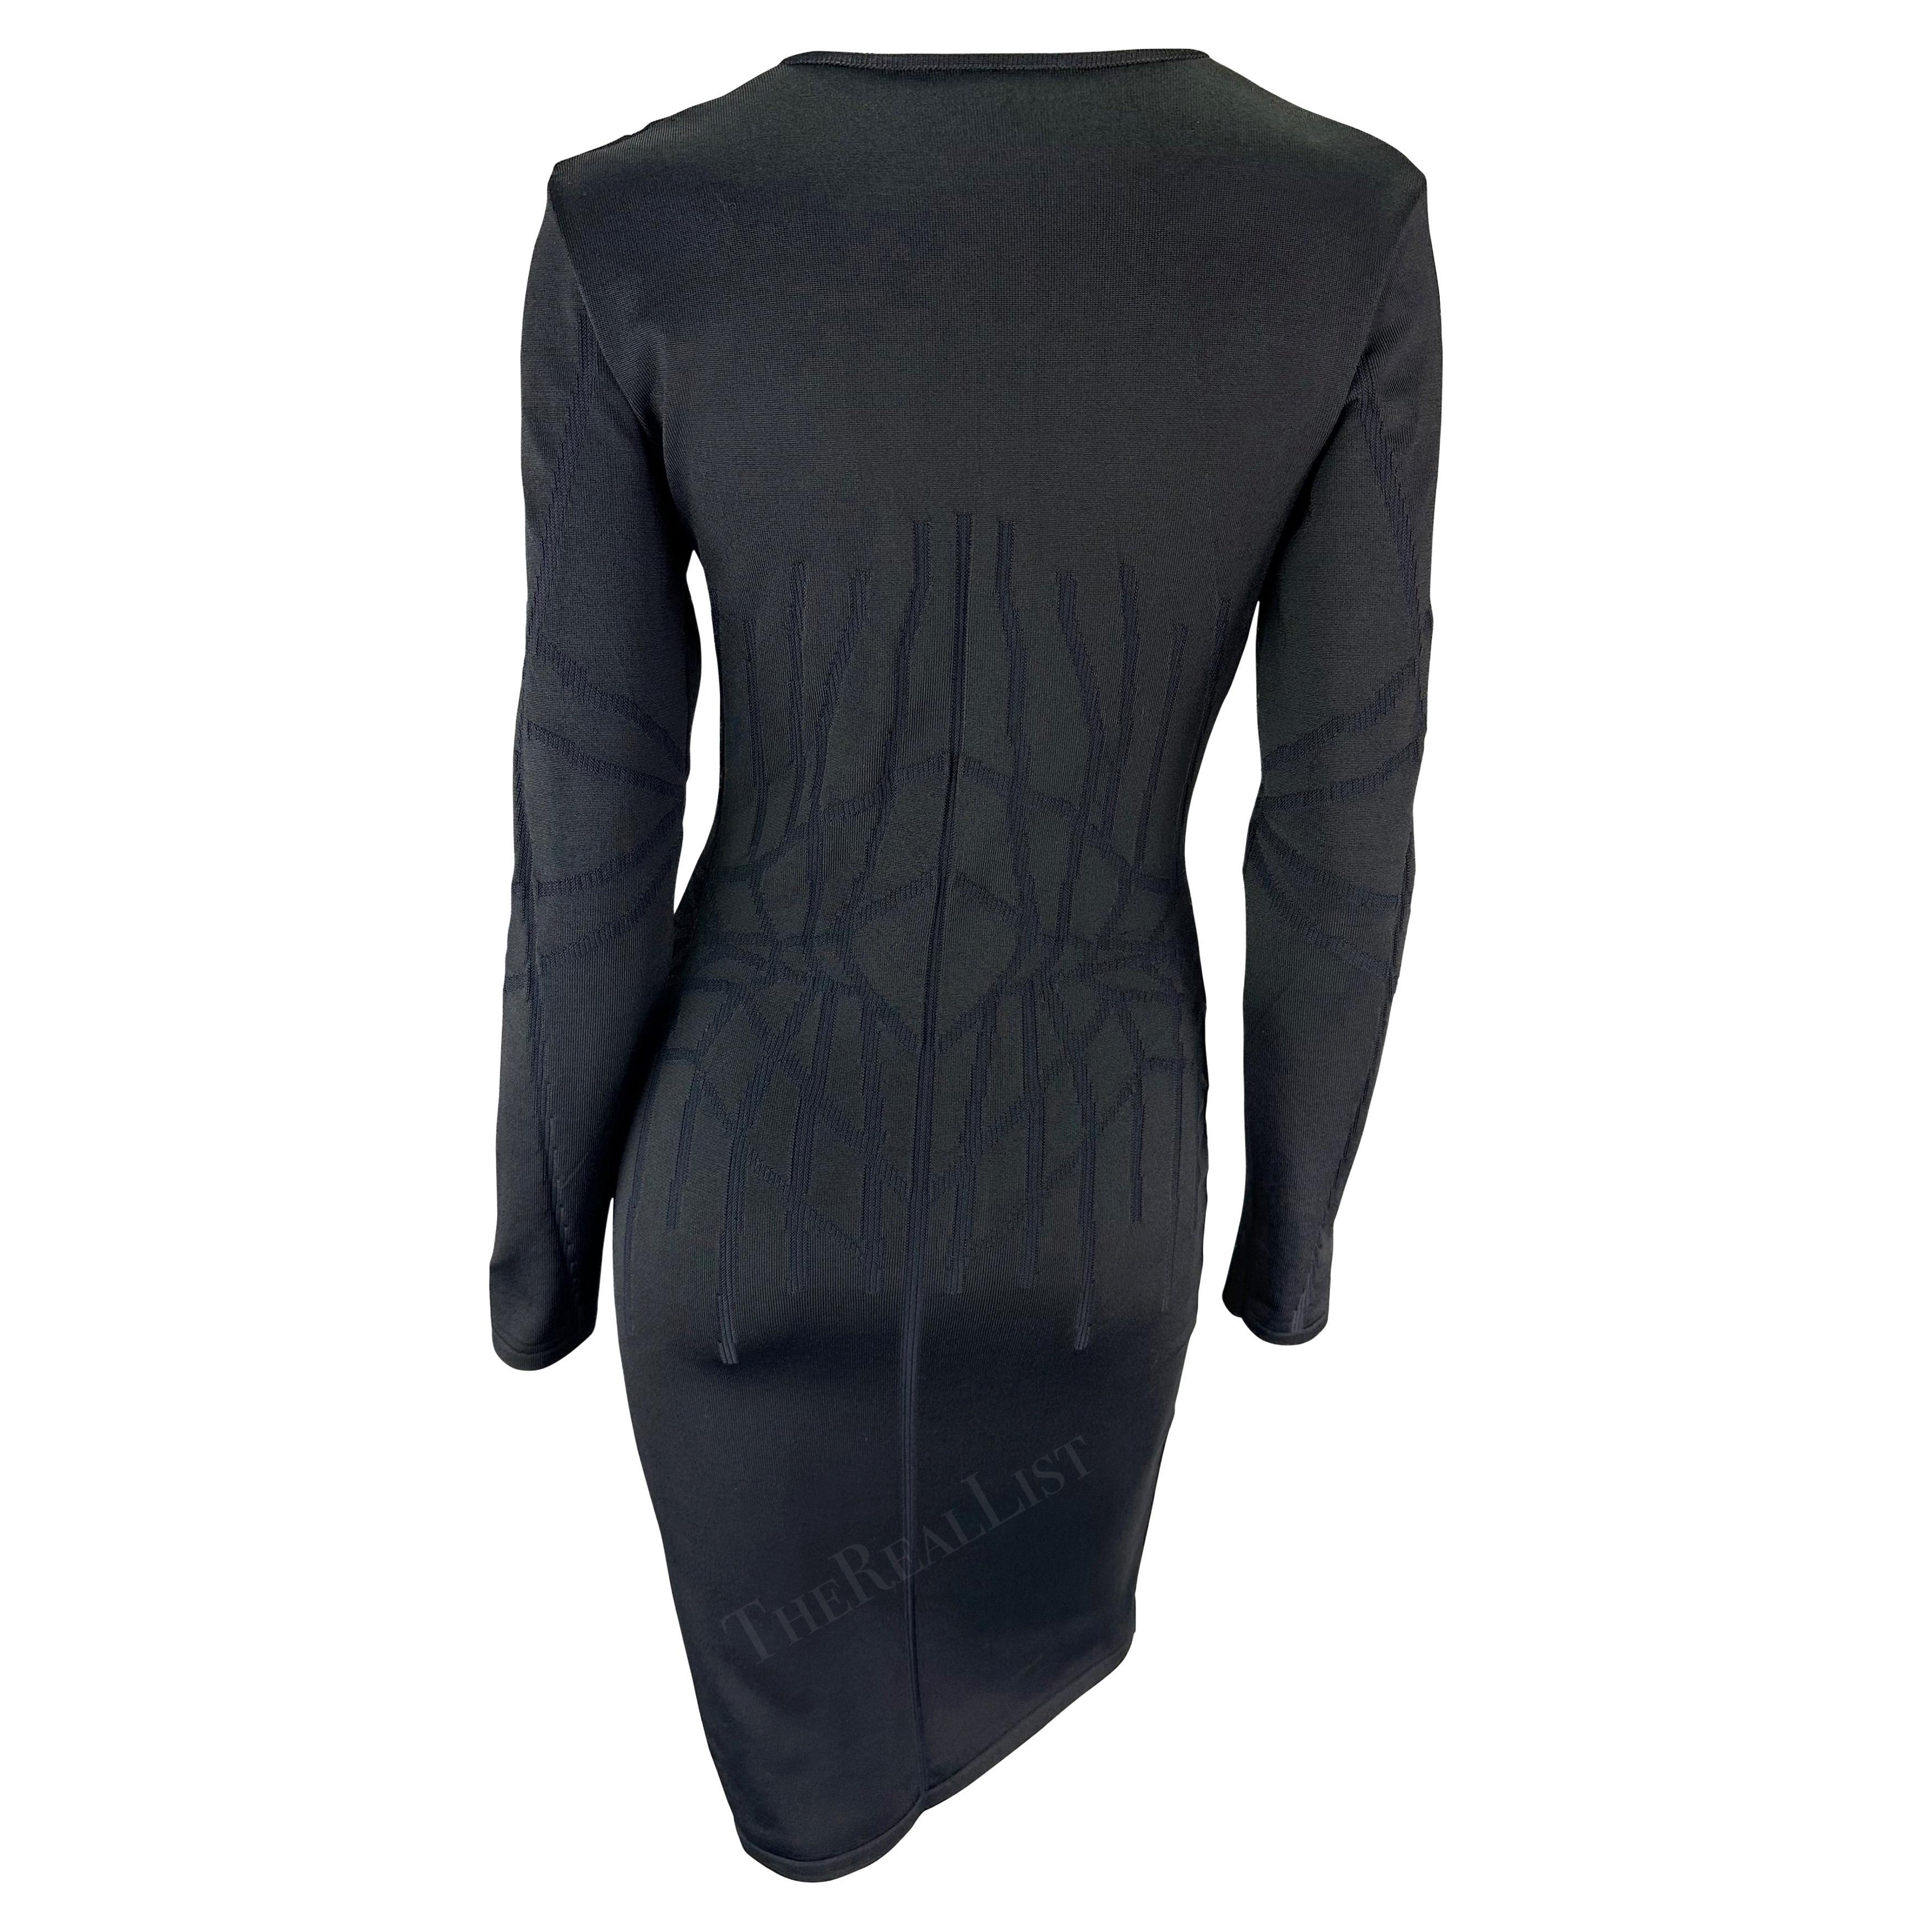 F/W 2001 Thierry Mugler Contour Outline Black Knit Bodycon Dress For Sale 2